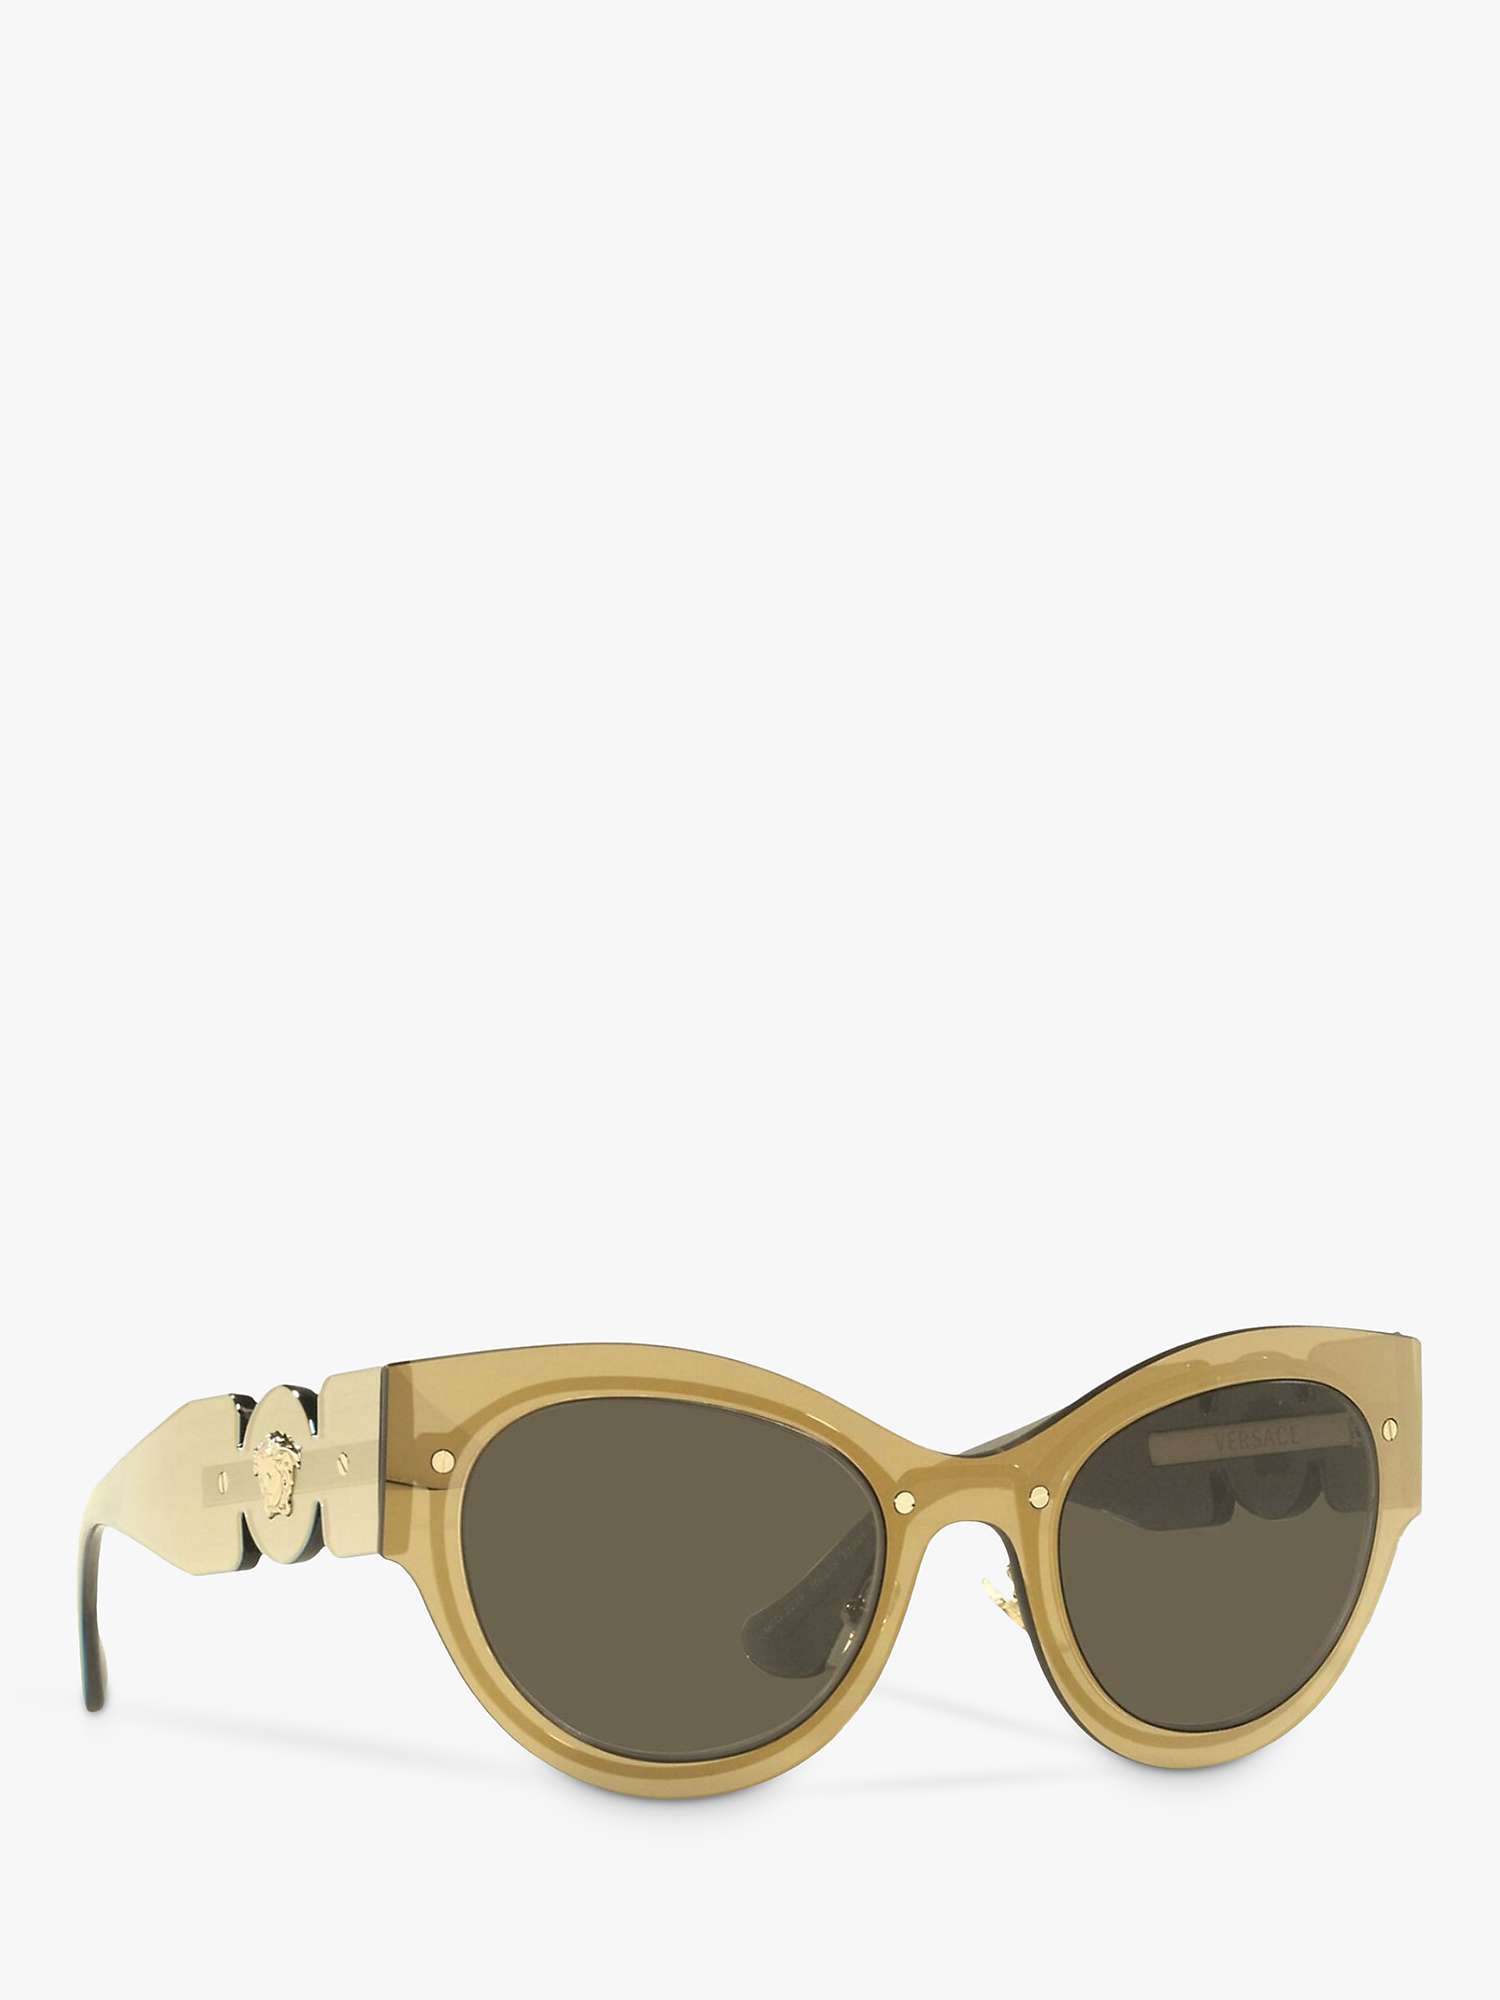 Buy Versace VE2234 Women's Butterfly Sunglasses, Transparent Brown/Mirror Gold Online at johnlewis.com